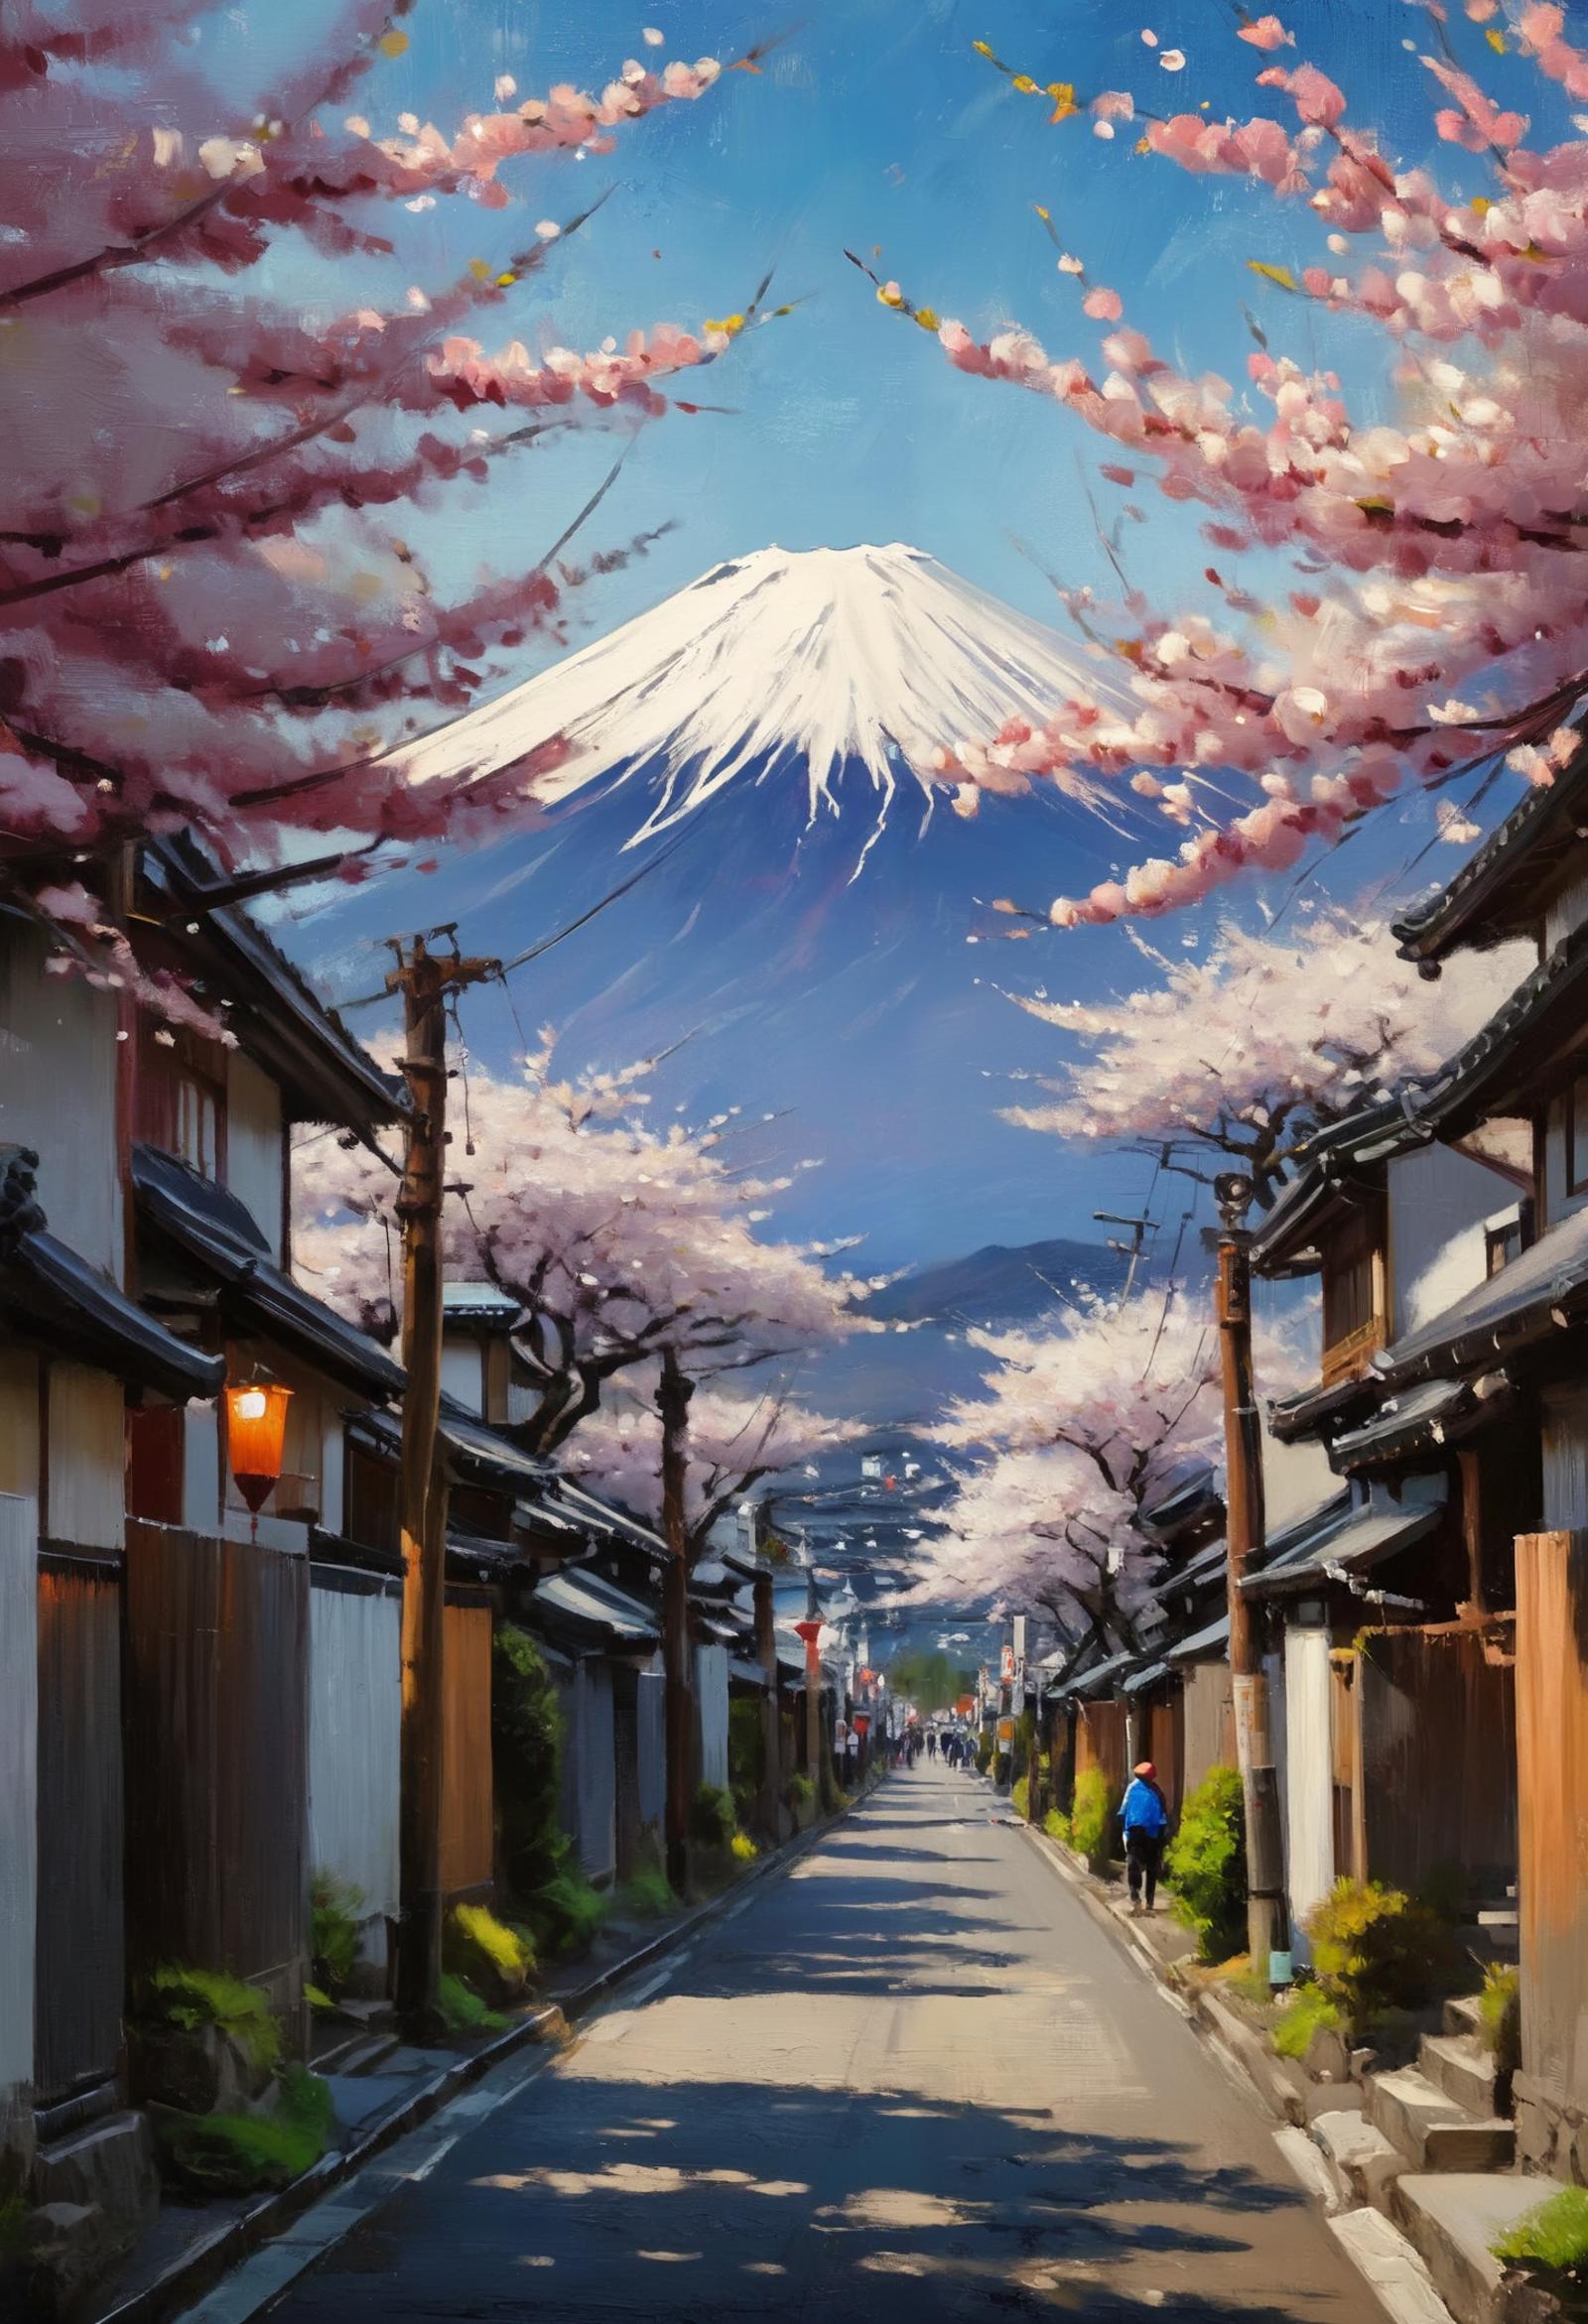 A Painting of a Town with a Snow-Covered Mountain in the Background and a Cherry Blossom Tree Above the People